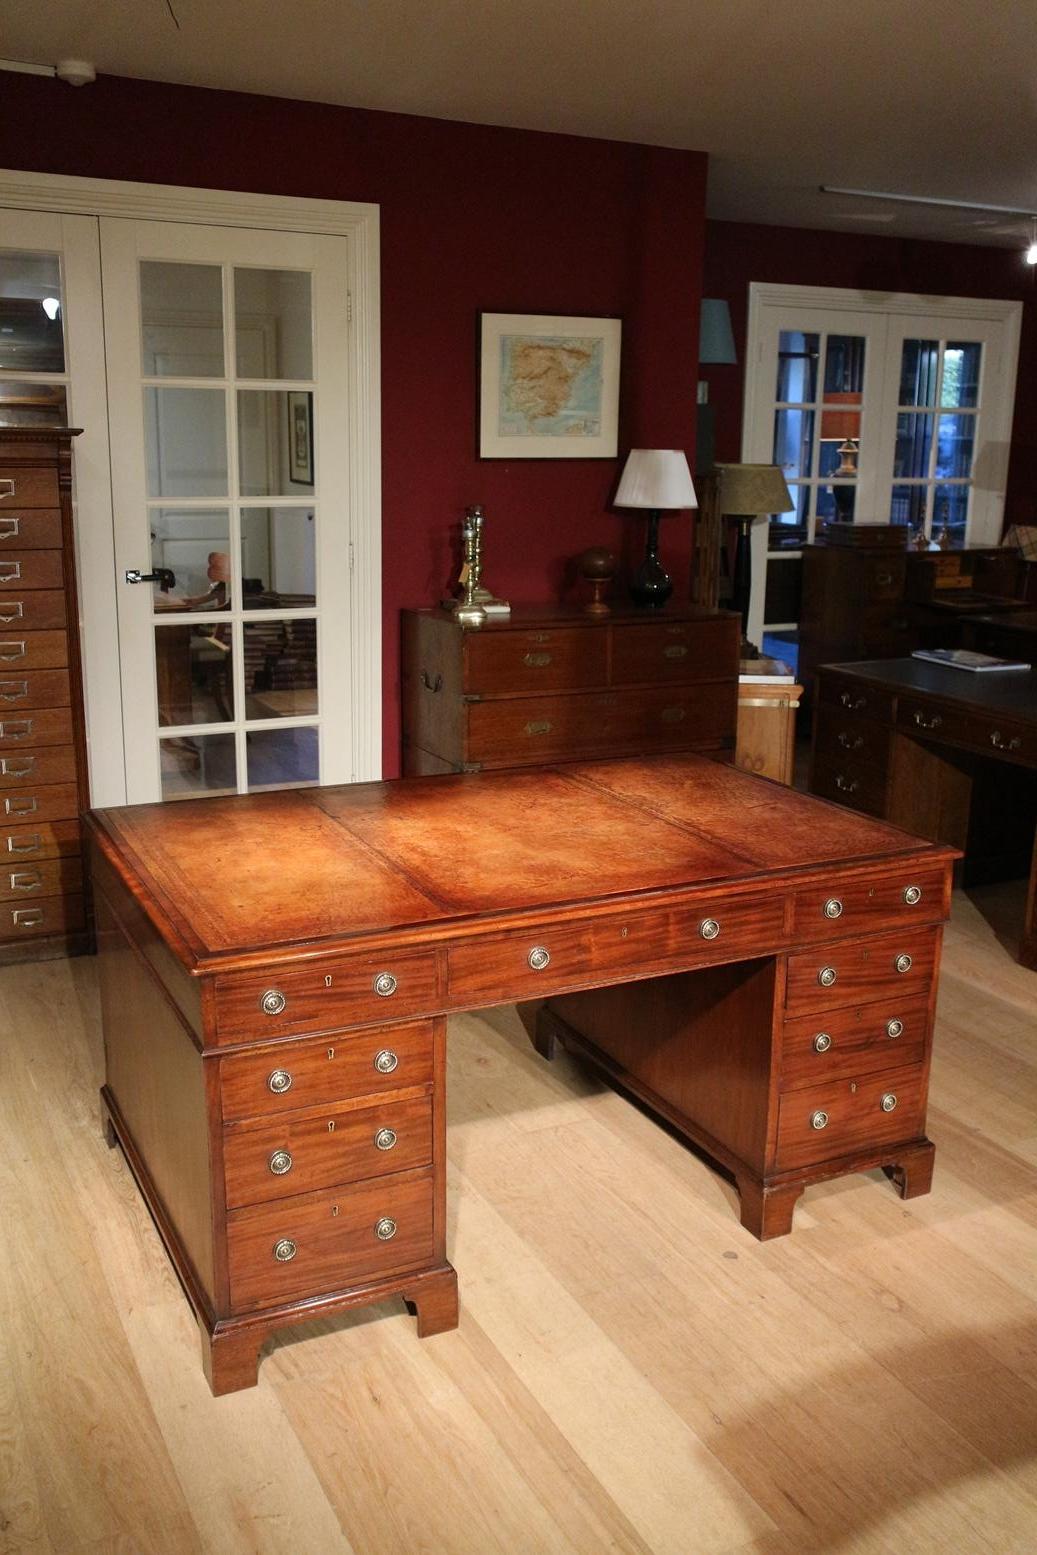 Beautiful antique partner desk in mahogany with good patina. 1 side with 9 drawers and 1 side with 3 drawers and 2 cabinets. Entirely in very good condition. Light brown weathered leather top. Practically usable desk.
Origin: England
Period: